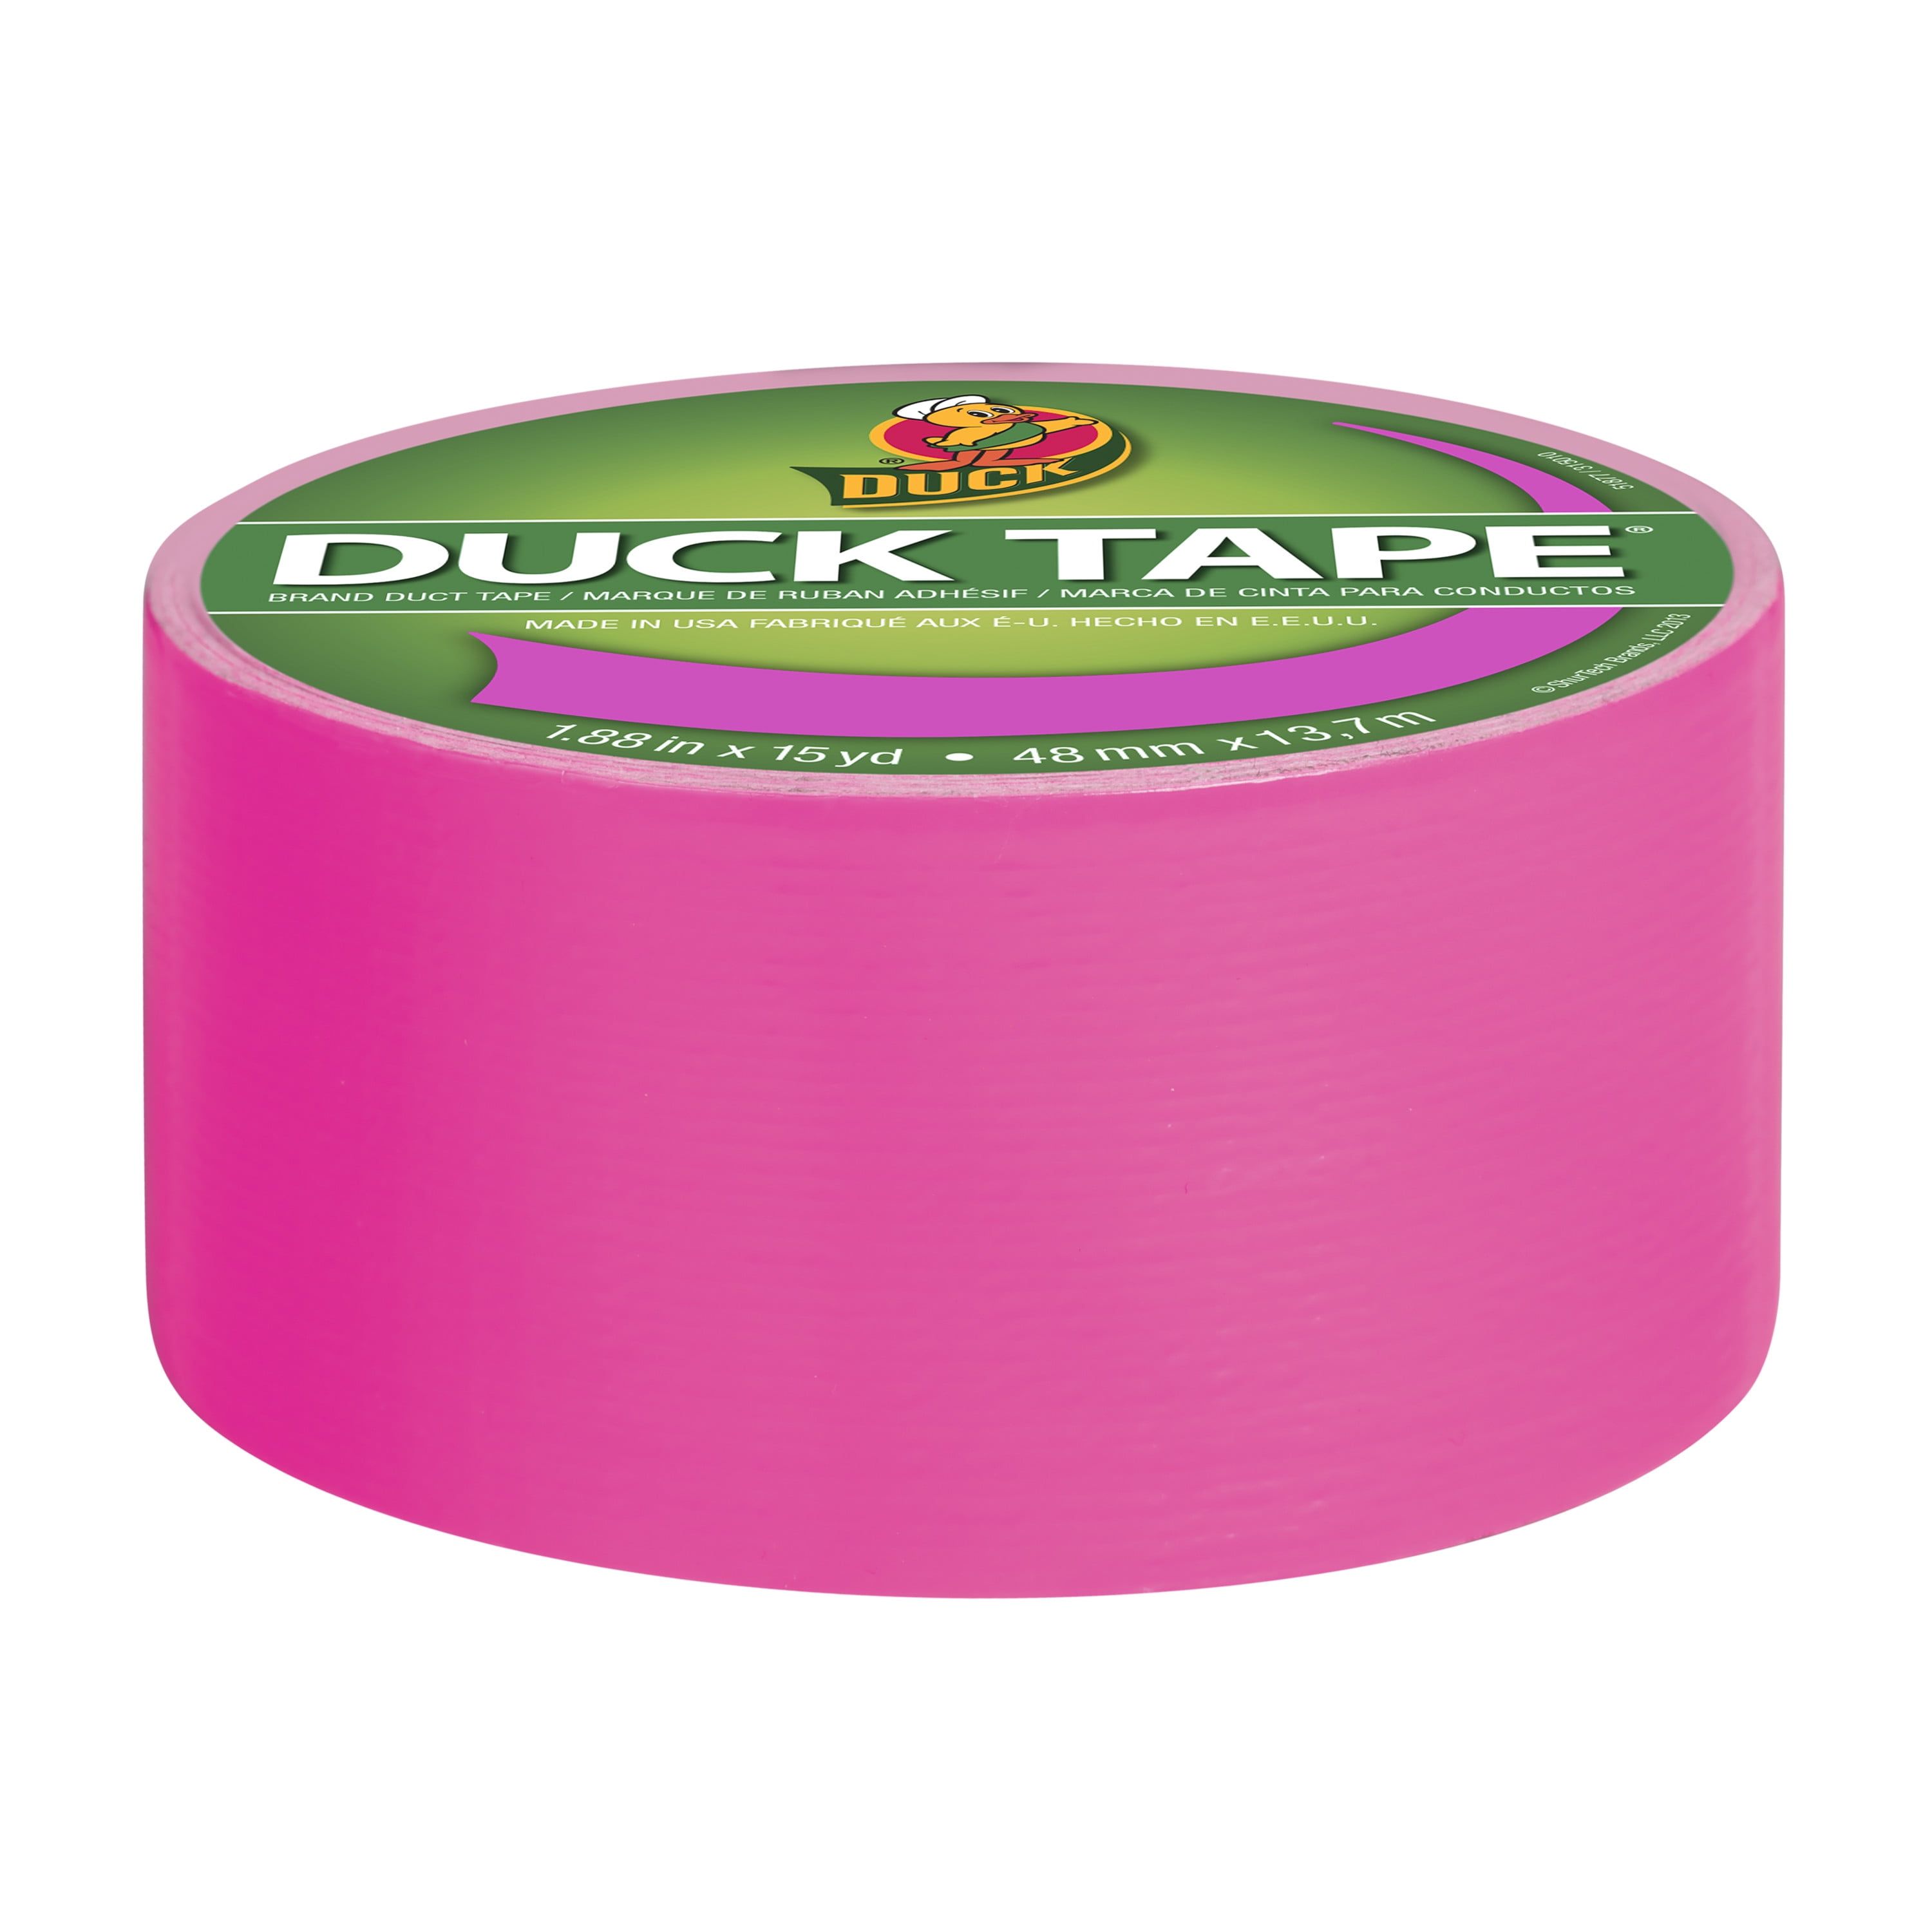 Rainbow Colored Duct Tape - 6 Bright Duct Tape Colors - 10 Yards x 2 Inch -  Waterproof Duct Tape - Multipack for Arts - Heavy Duty Color Duct Tape